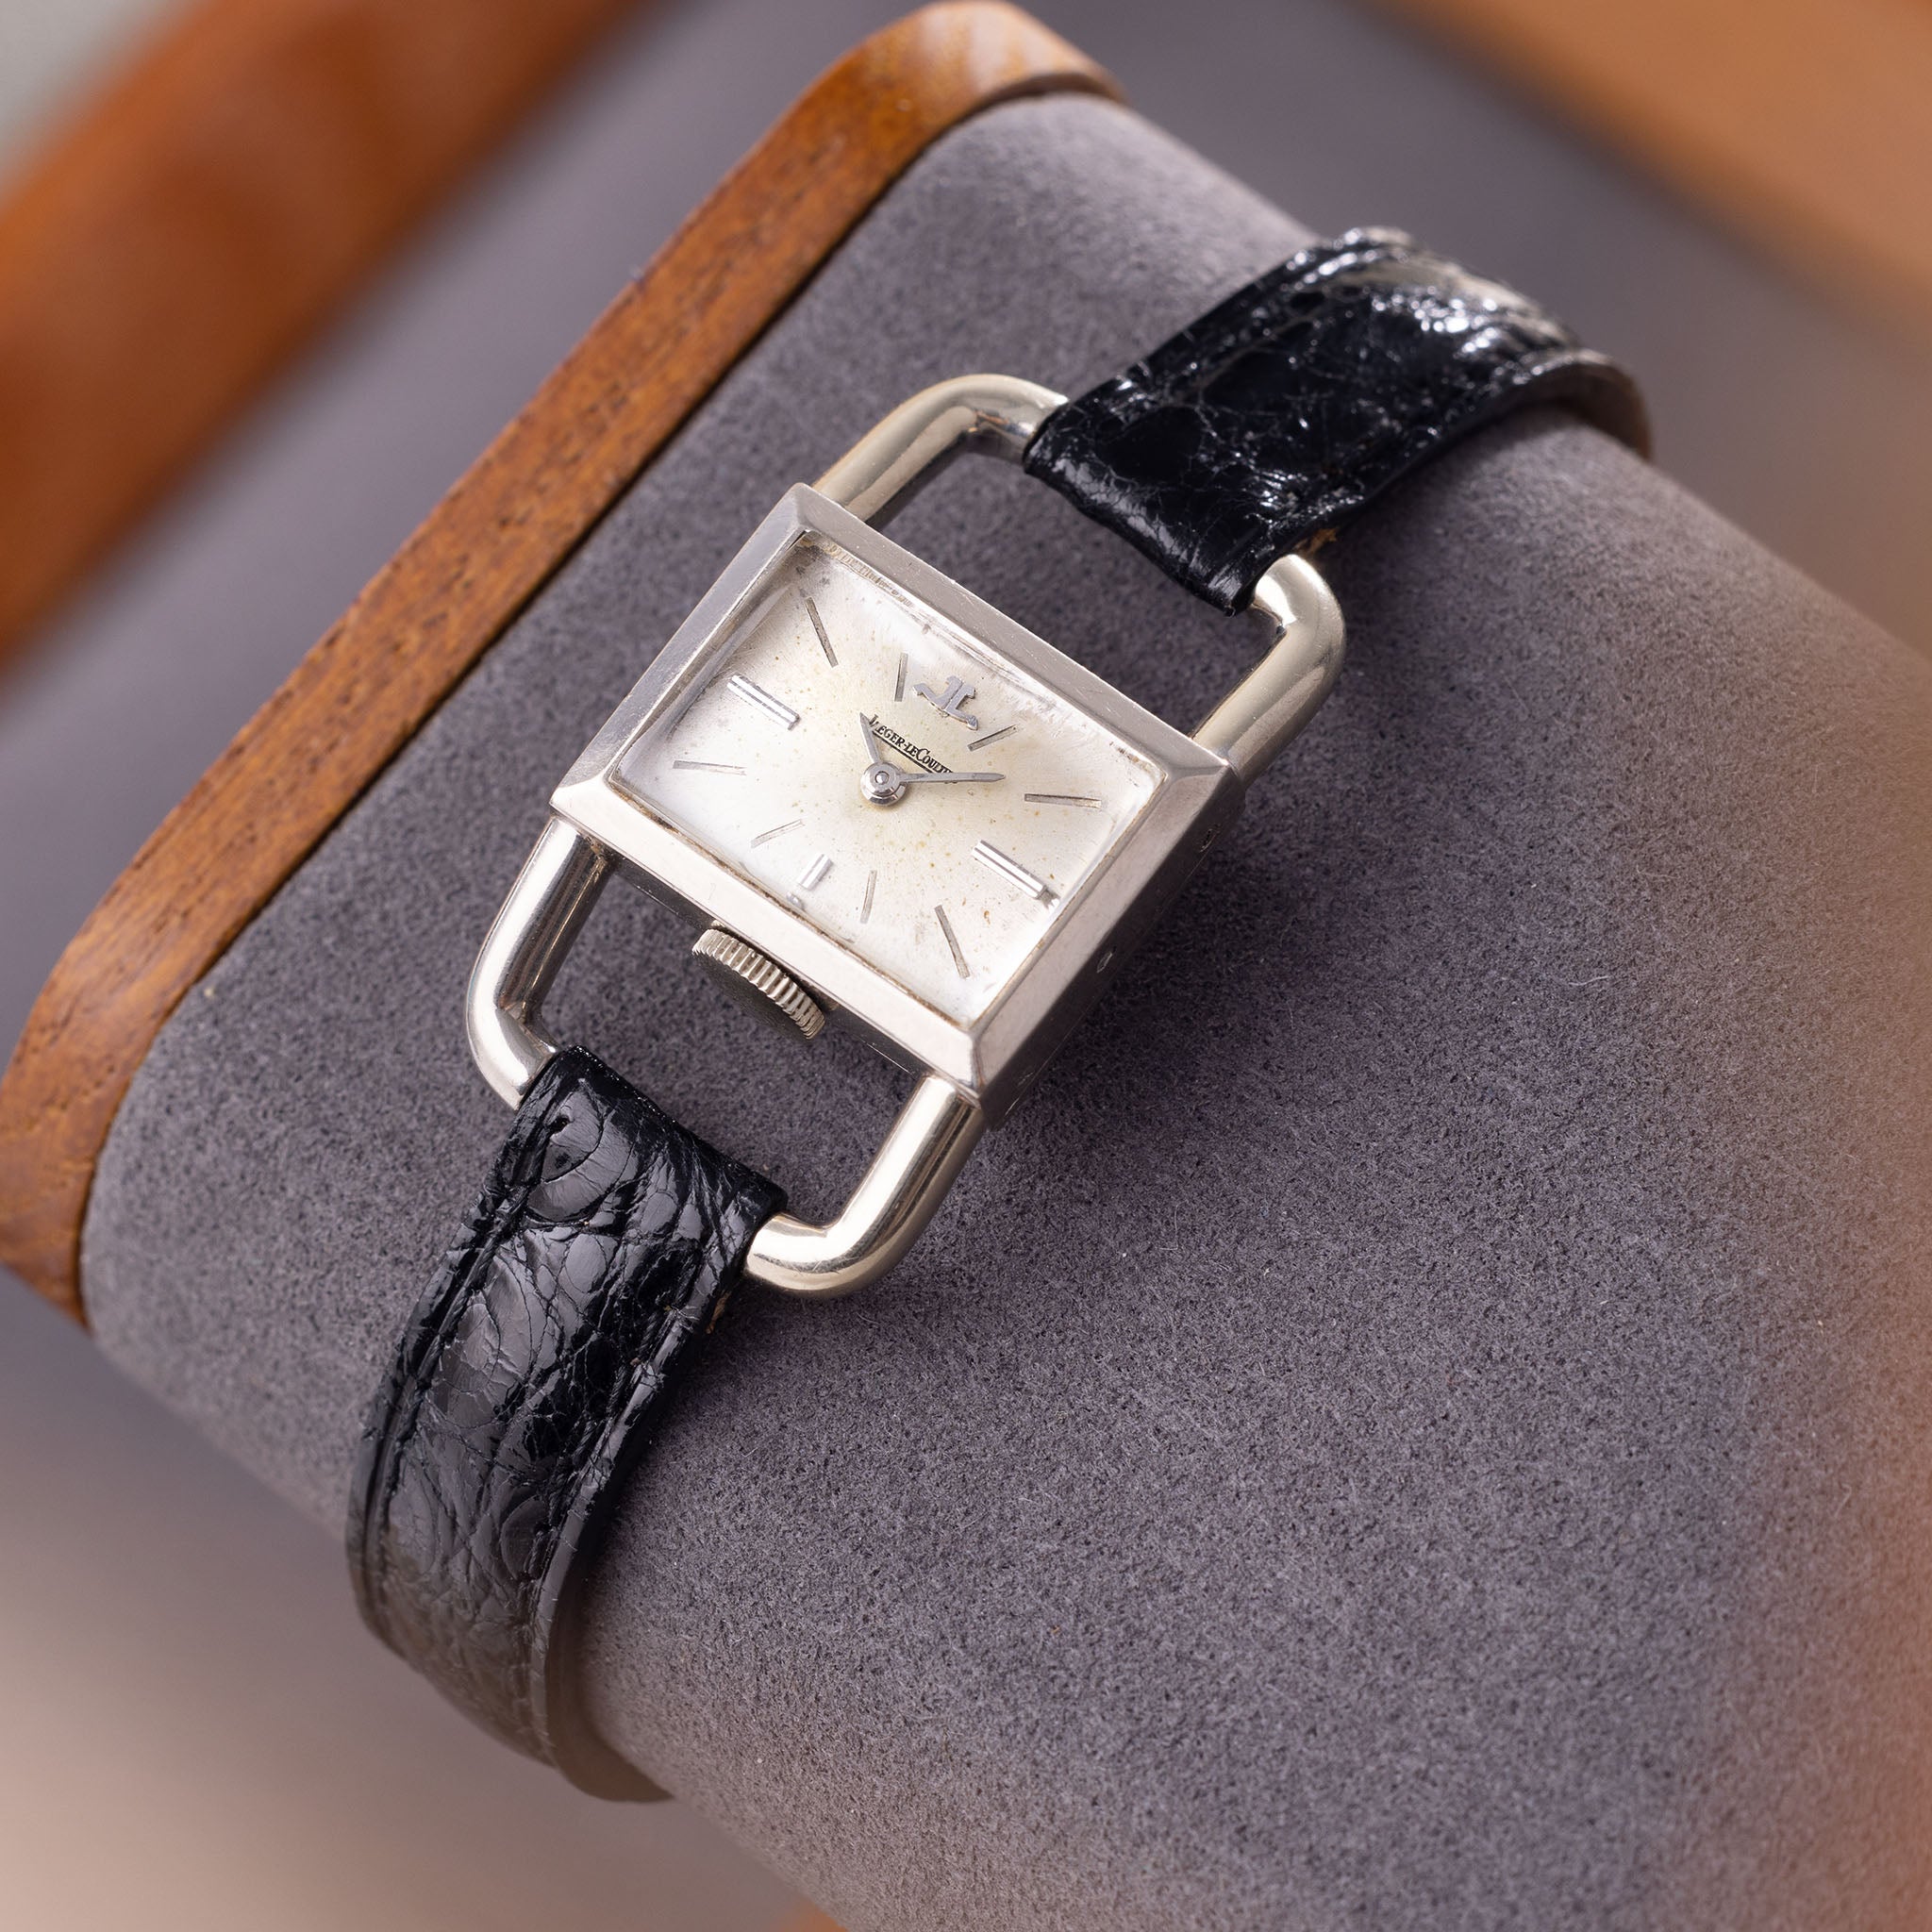 Jaeger LeCoultre for Hèrmes Etrier White Gold Reference 9041 